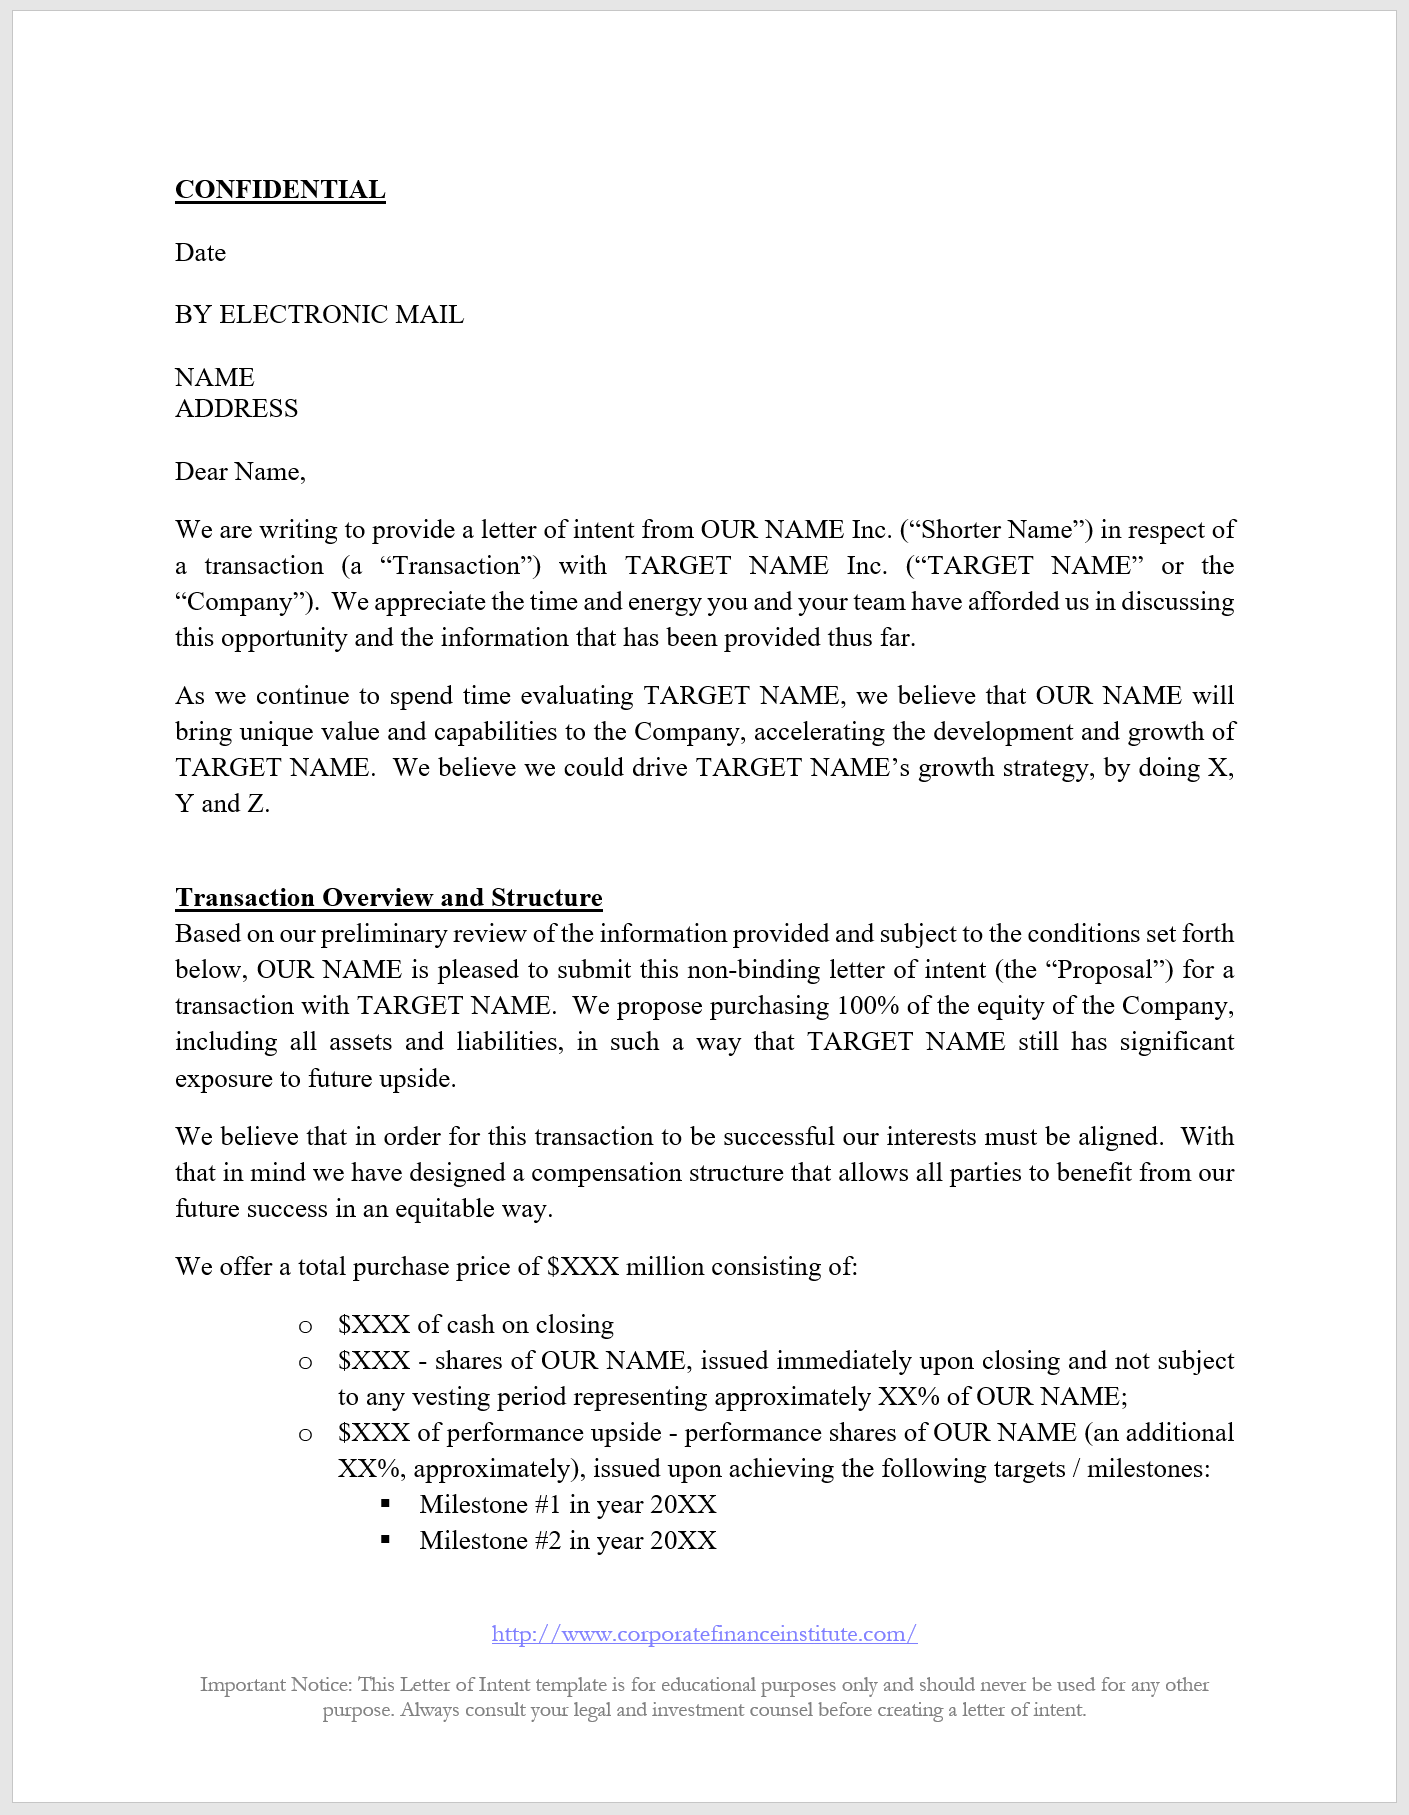 Letter of Intent (LOI) example and template